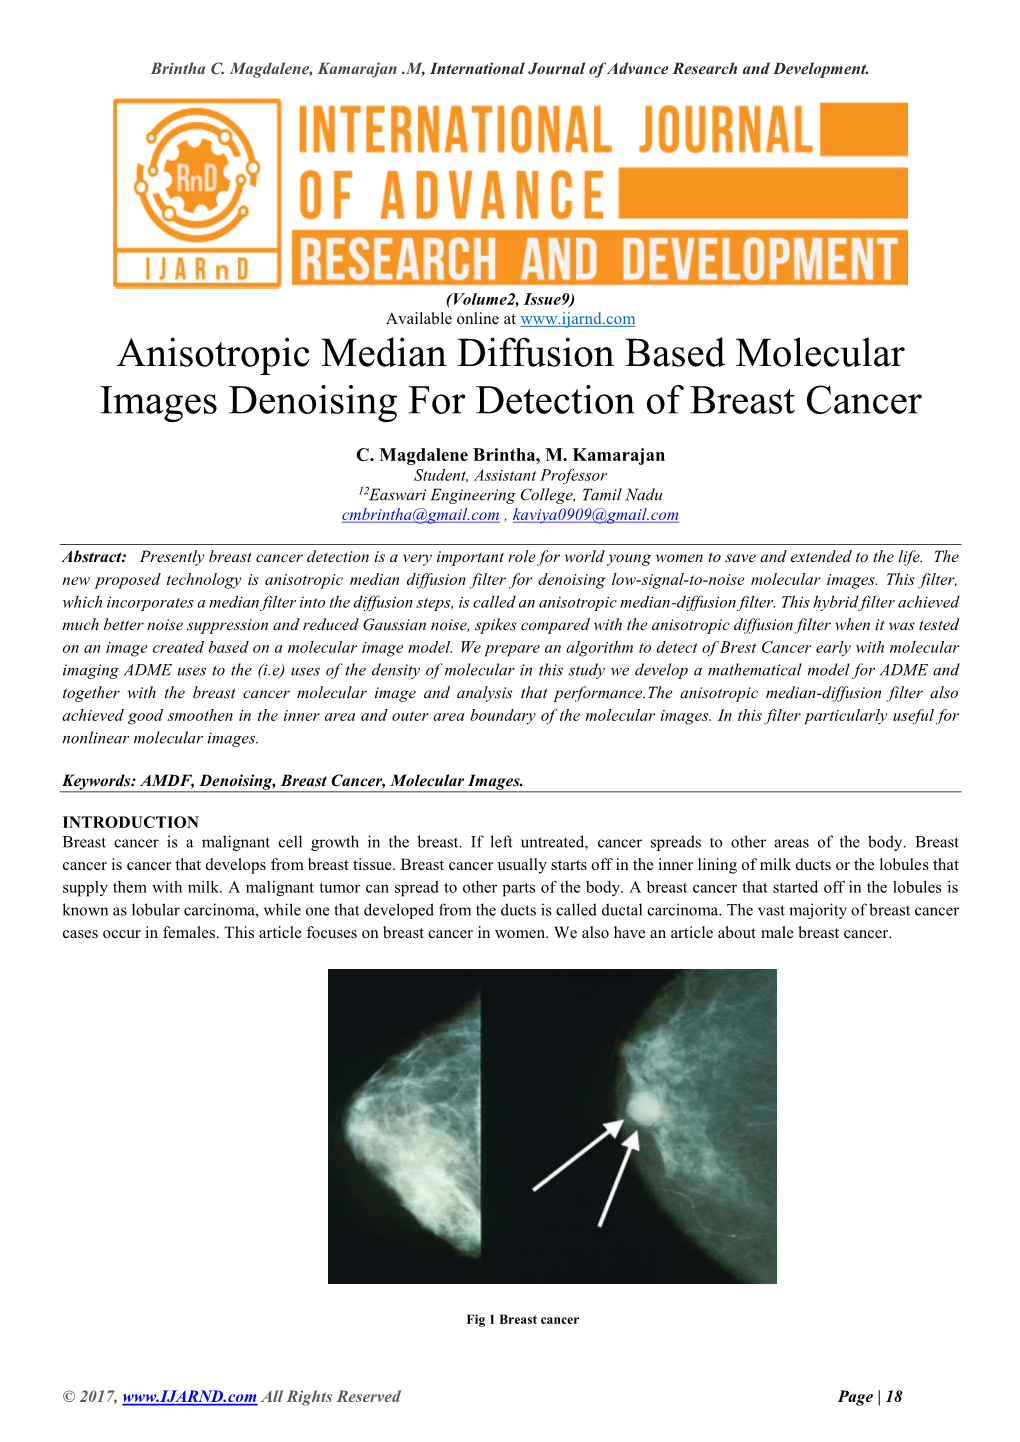 Anisotropic Median Diffusion Based Molecular Images Denoising for Detection of Breast Cancer